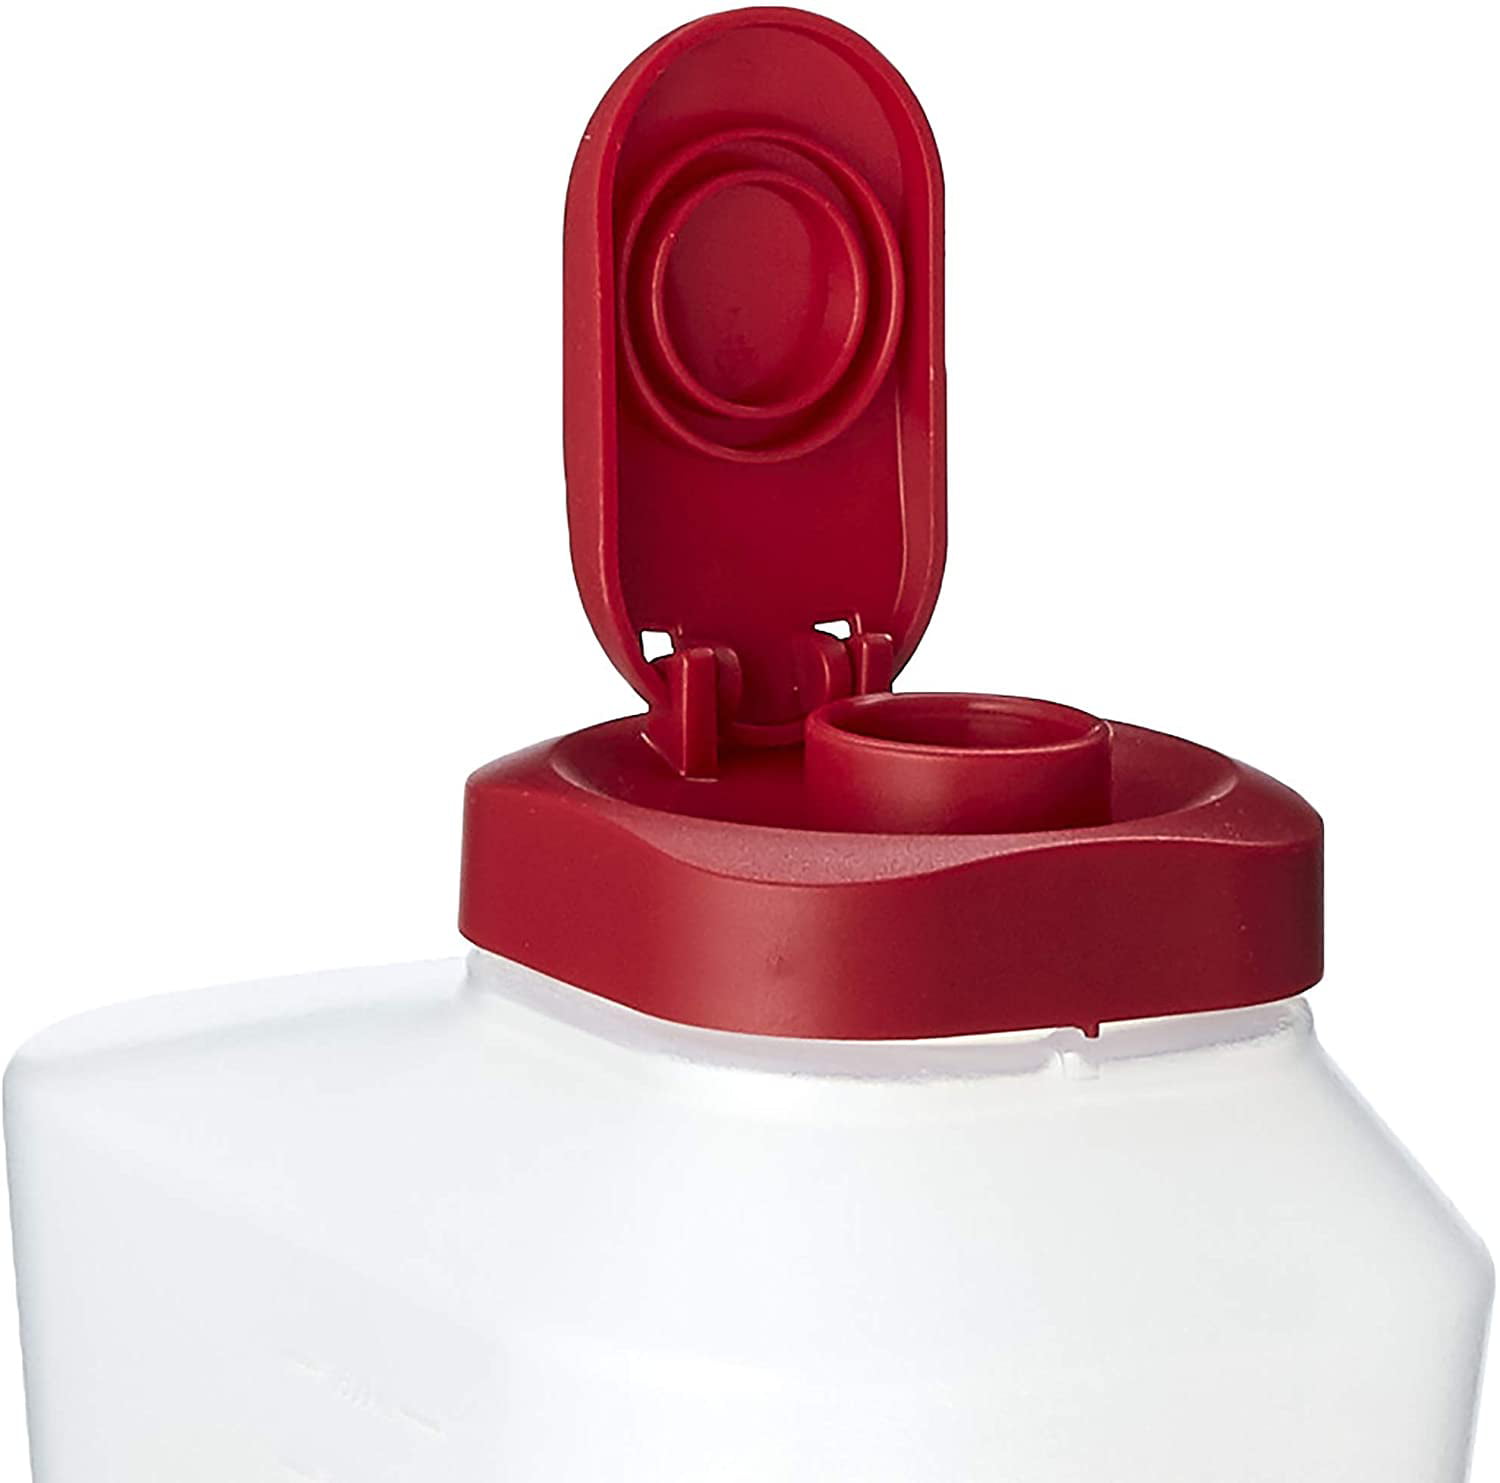 Tighten Square Cap with snap Lock Cap clear and red Fоur Paсk, clear and red Goodcook 1 quart mixing easy pour bottle with measurments rounded grip 